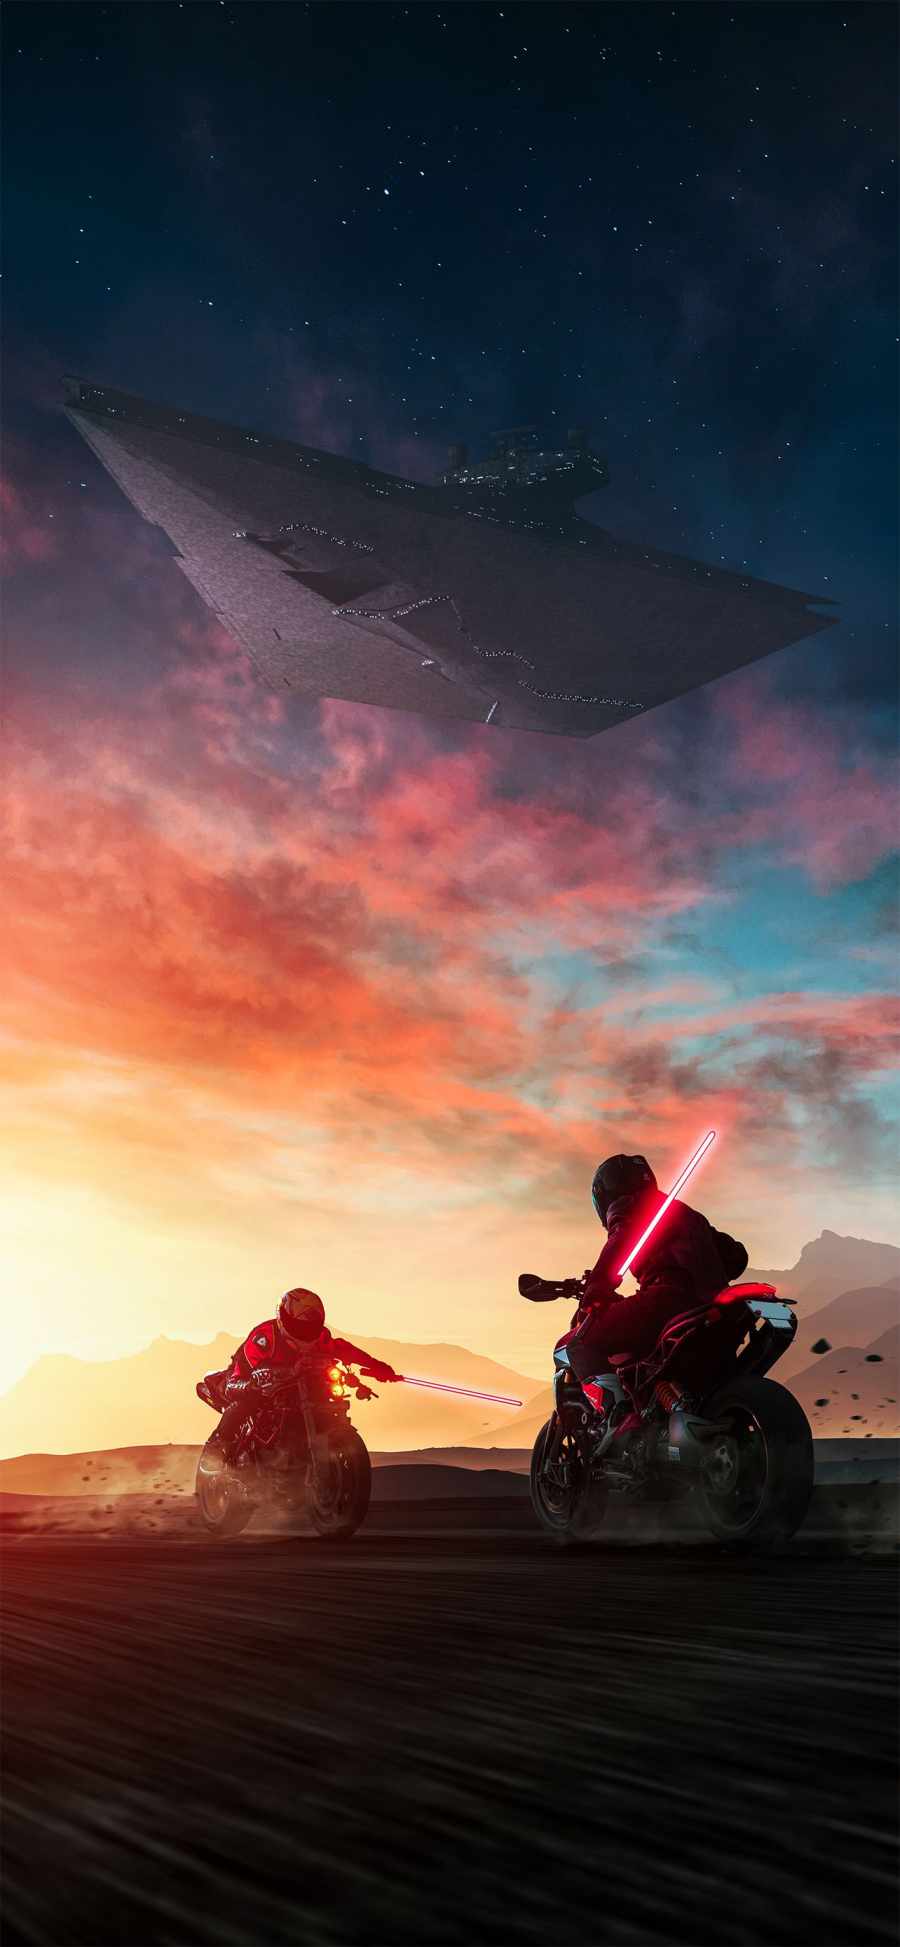 Bikers With Lightsaber IPhone Wallpaper Wallpaper, iPhone Wallpaper